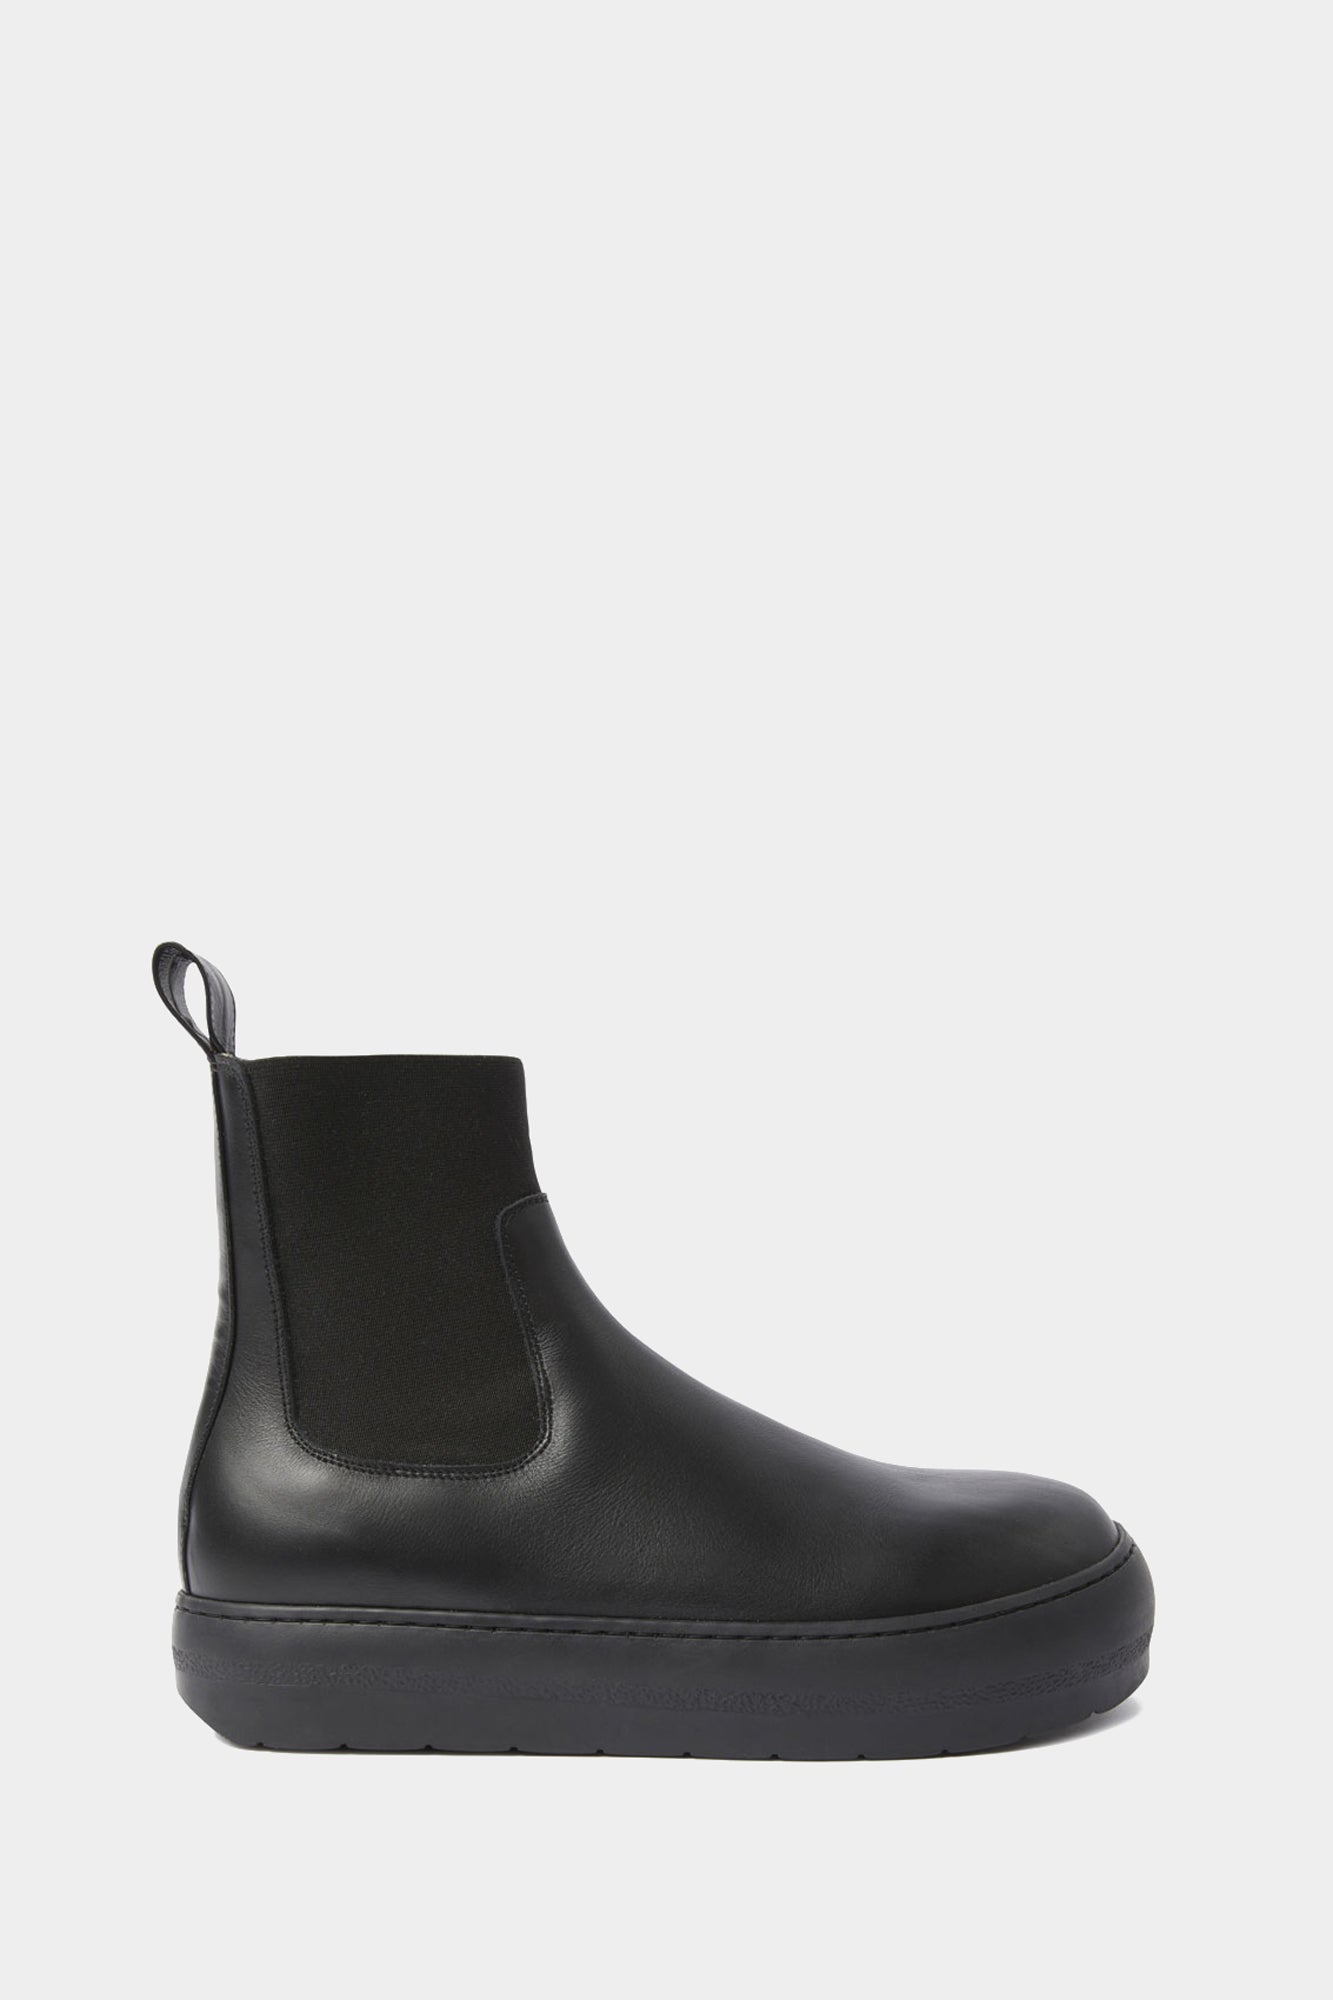 DREAMY ANKLE BOOTS / leather / total black